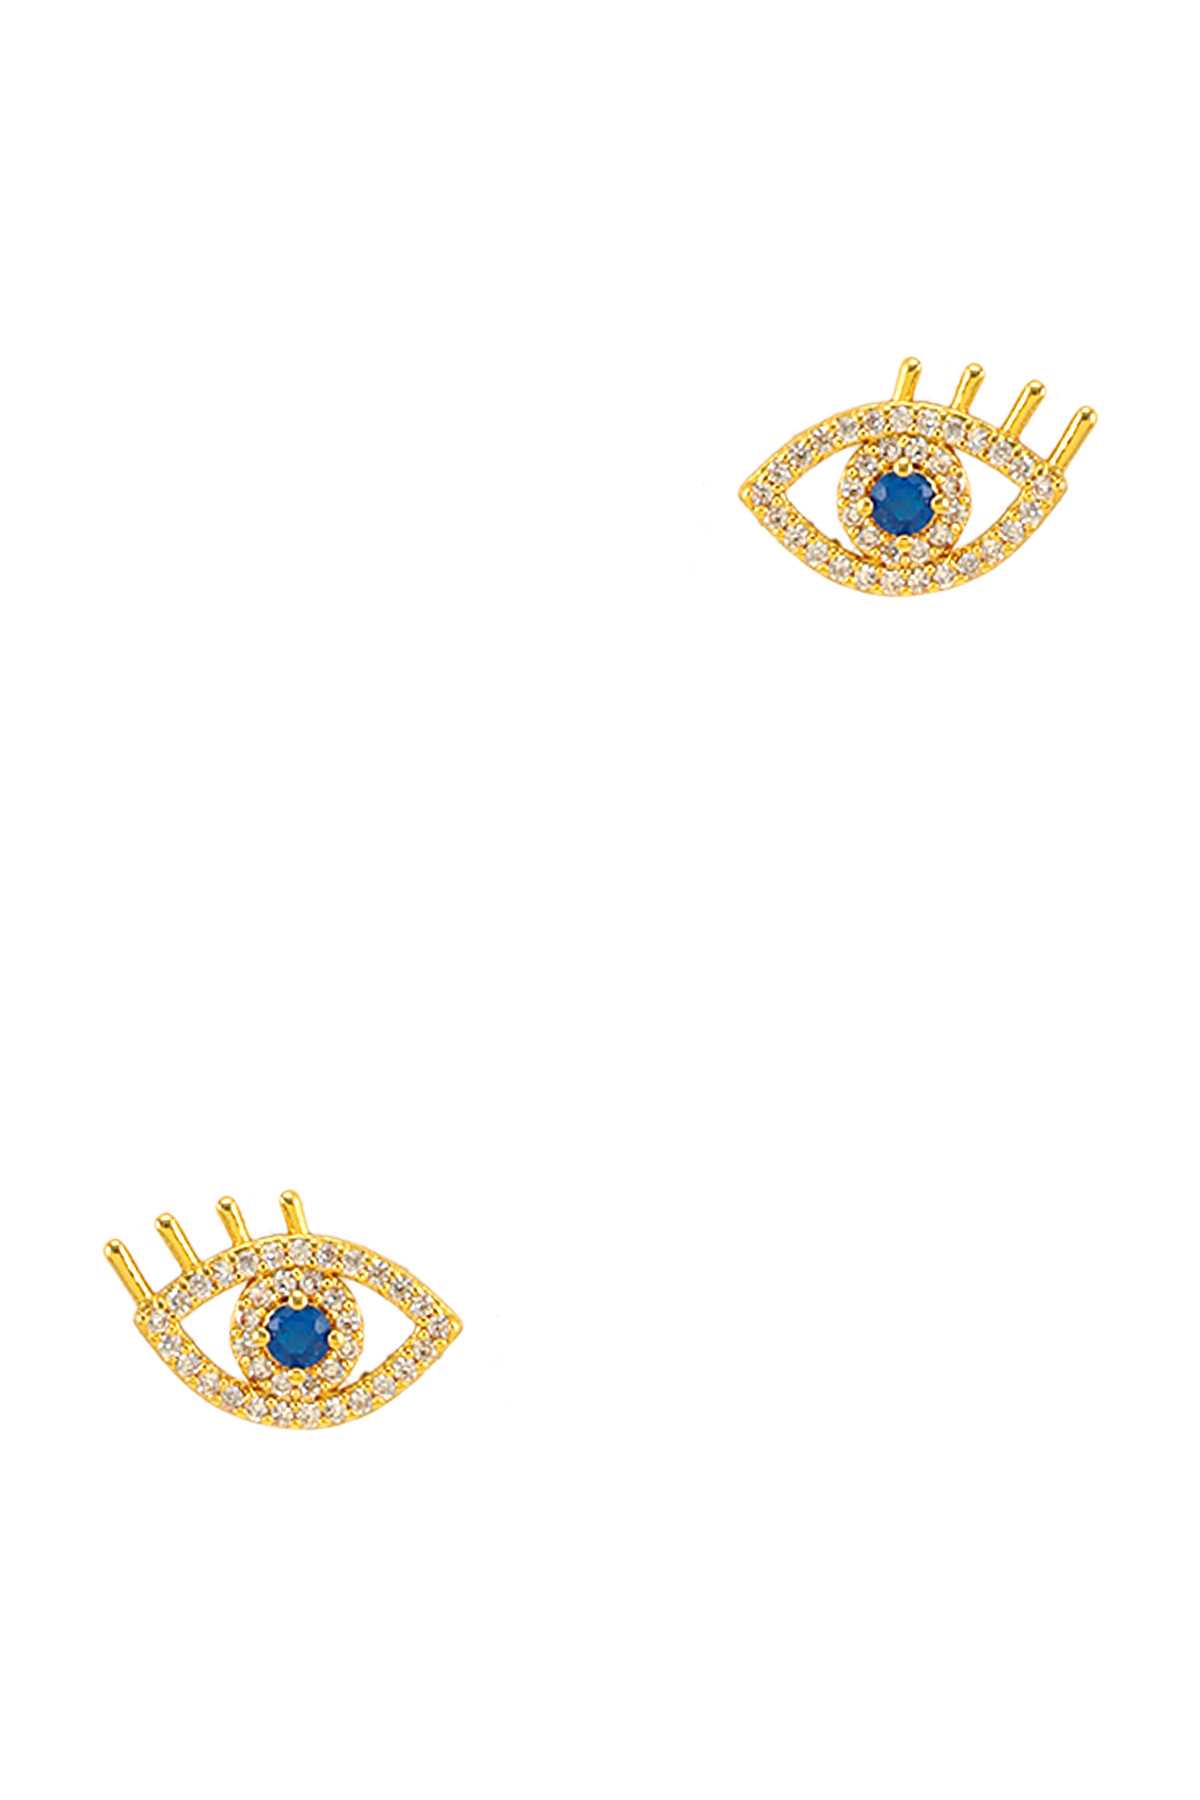 Gold Dipped Eye with Lashes Silver Post Earring